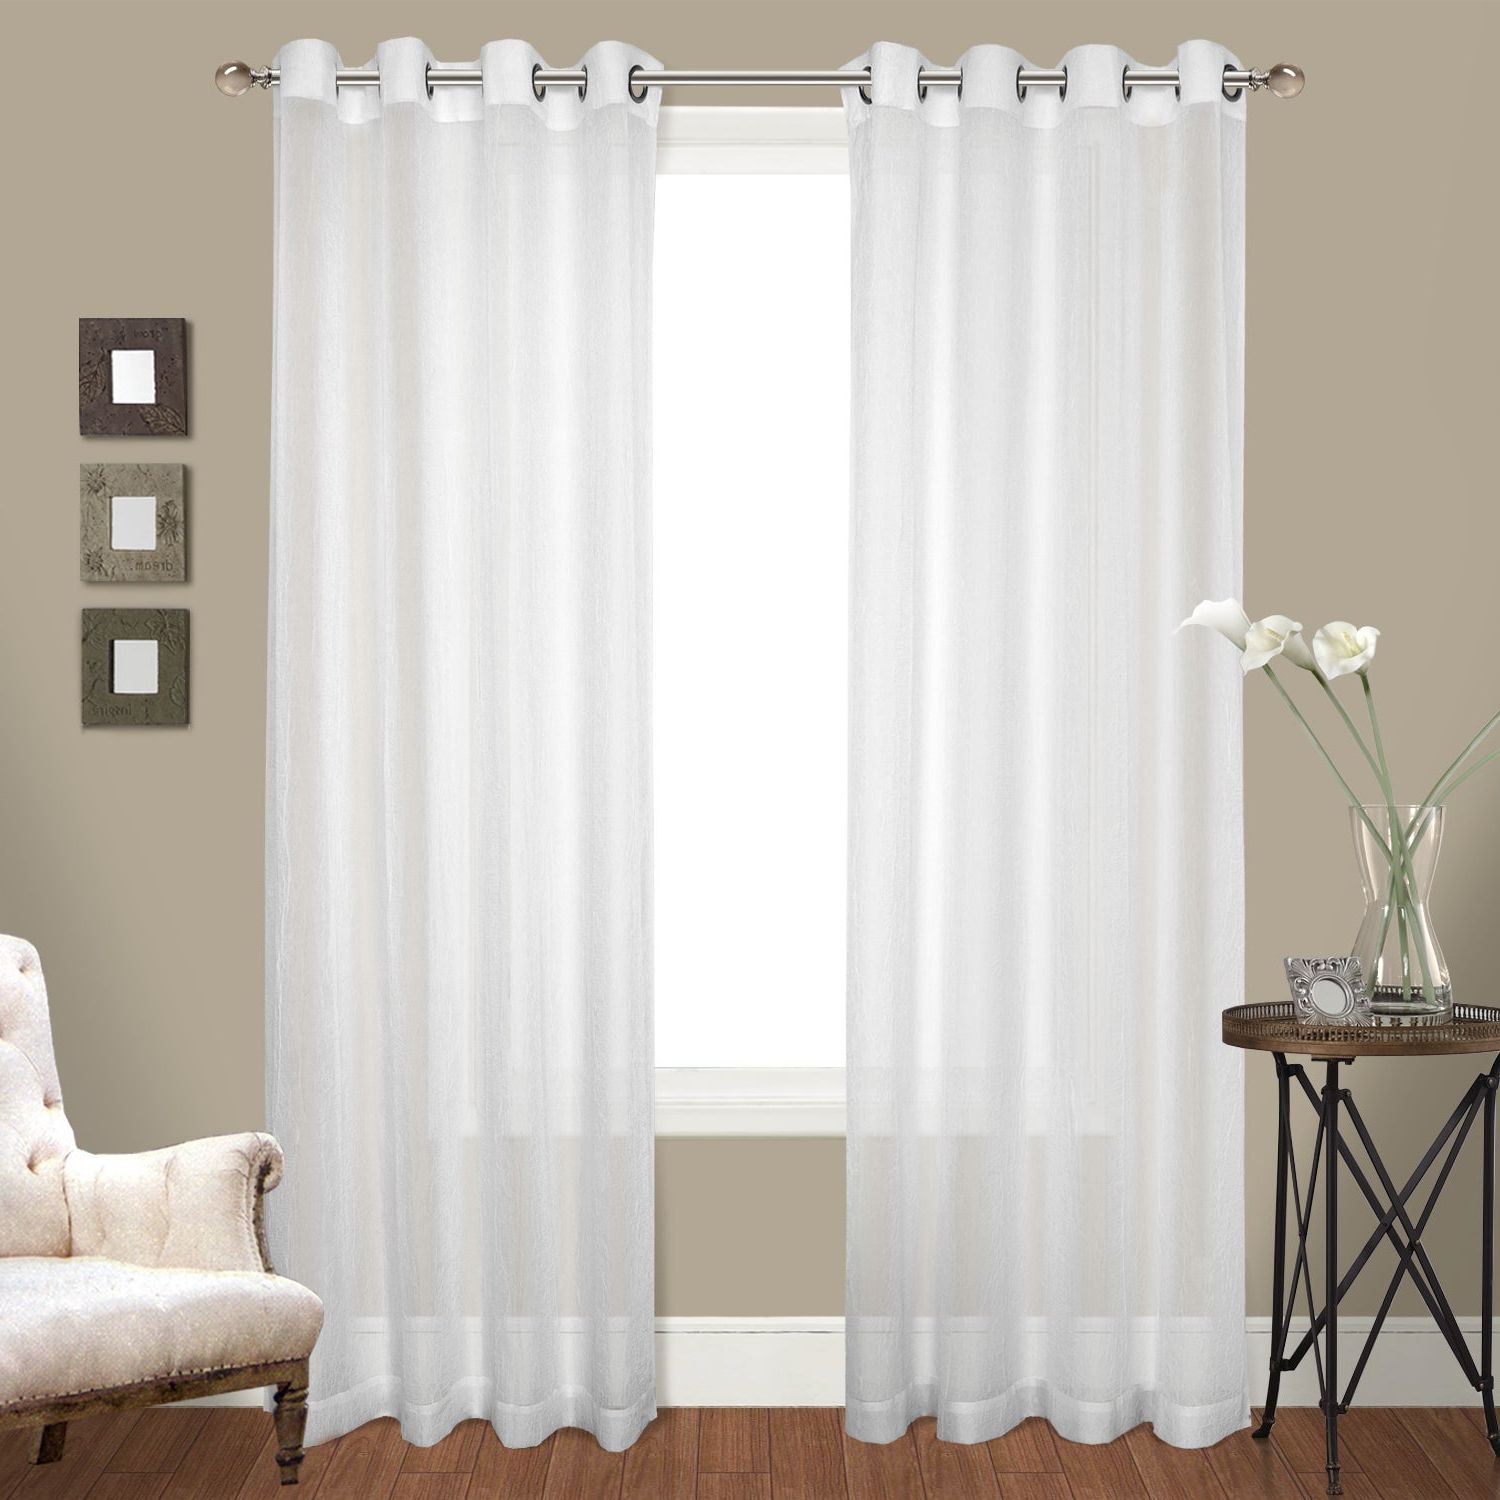 Luxury Collection Venetian Sheer Curtain Panel Pair With Regard To Well Liked Luxury Collection Venetian Sheer Curtain Panel Pairs (View 1 of 20)